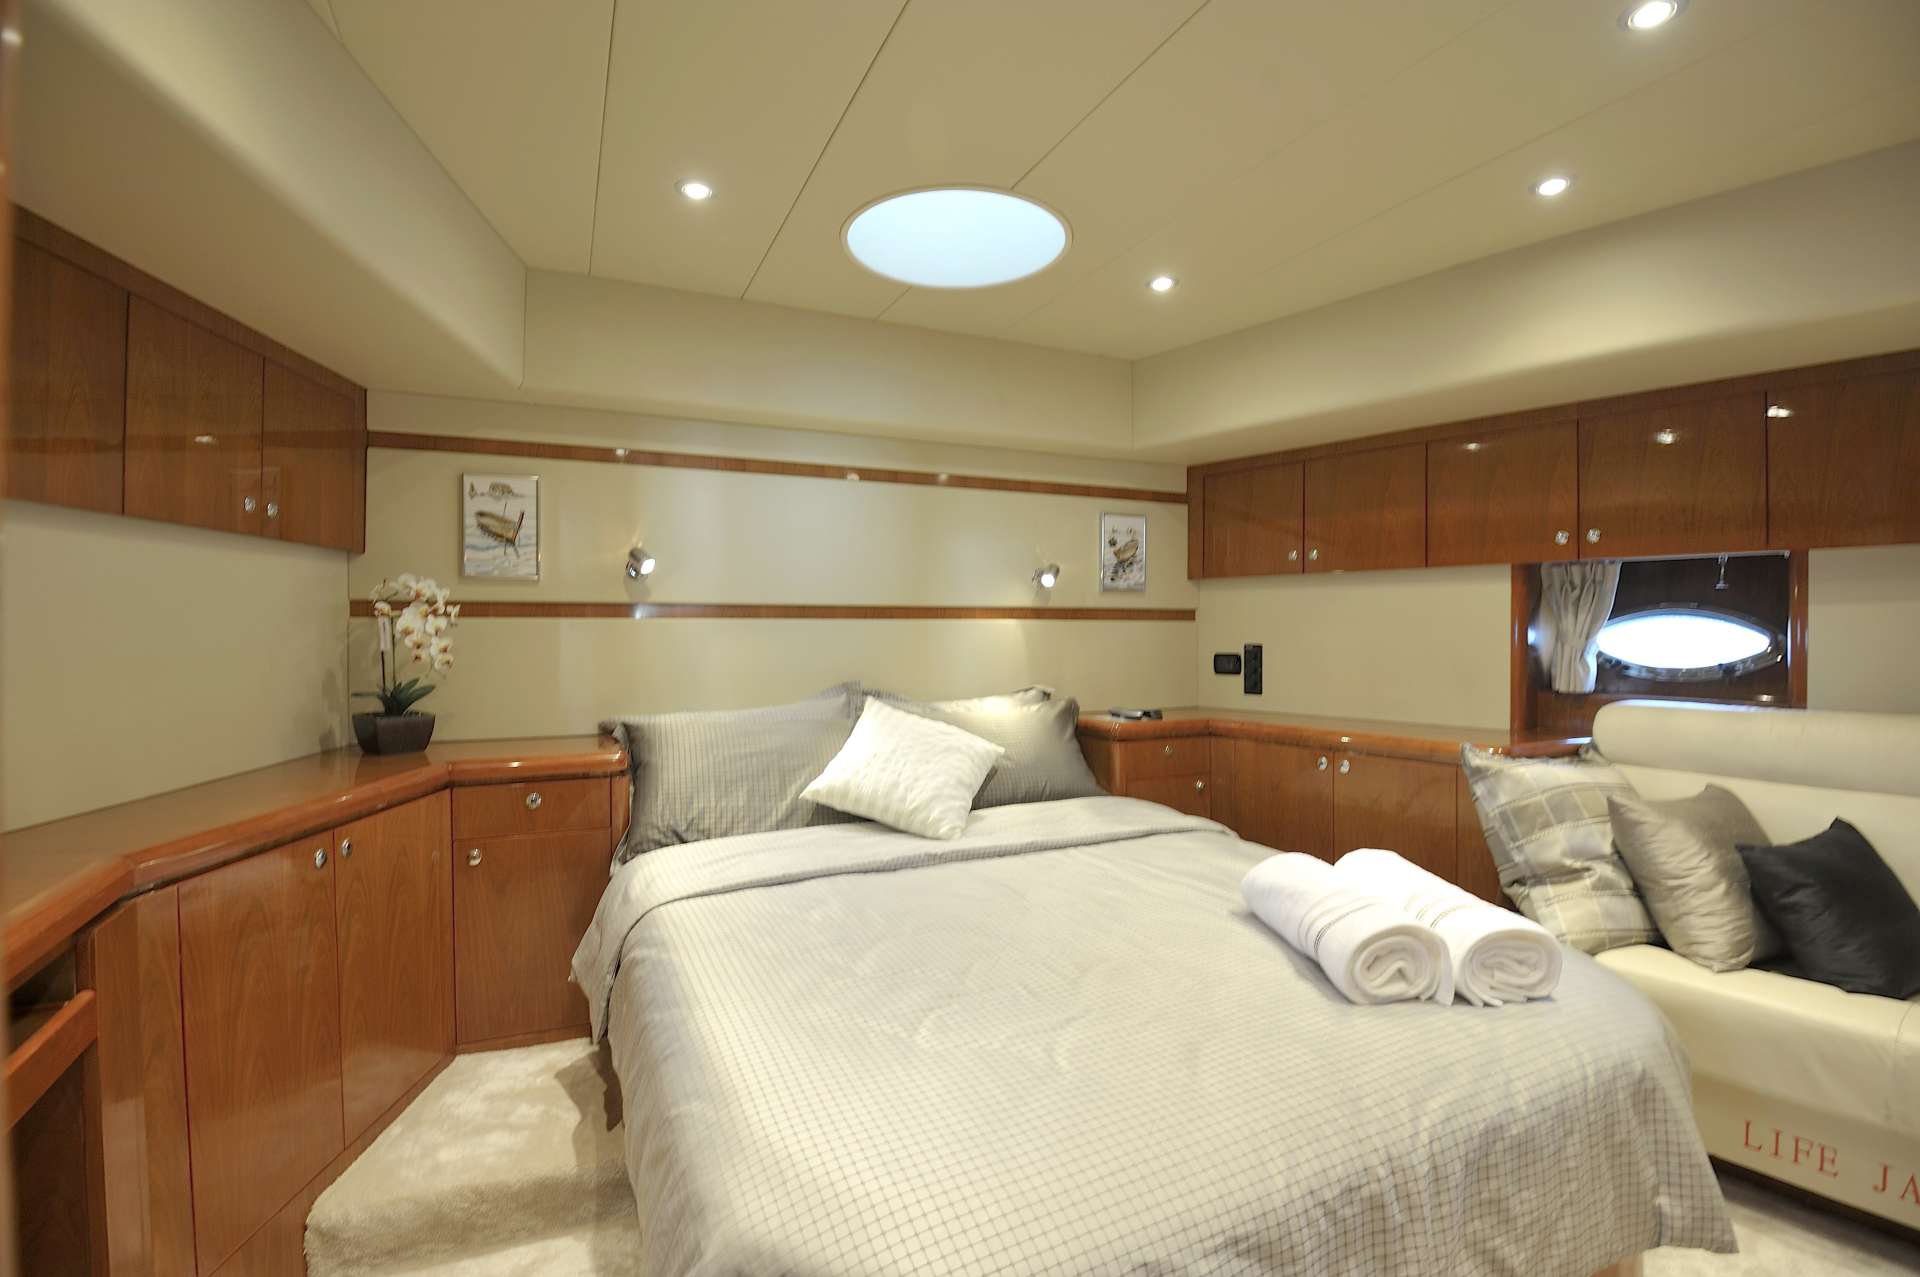 lady kathryn - Luxury yacht charter Thailand & Boat hire in SE Asia 6